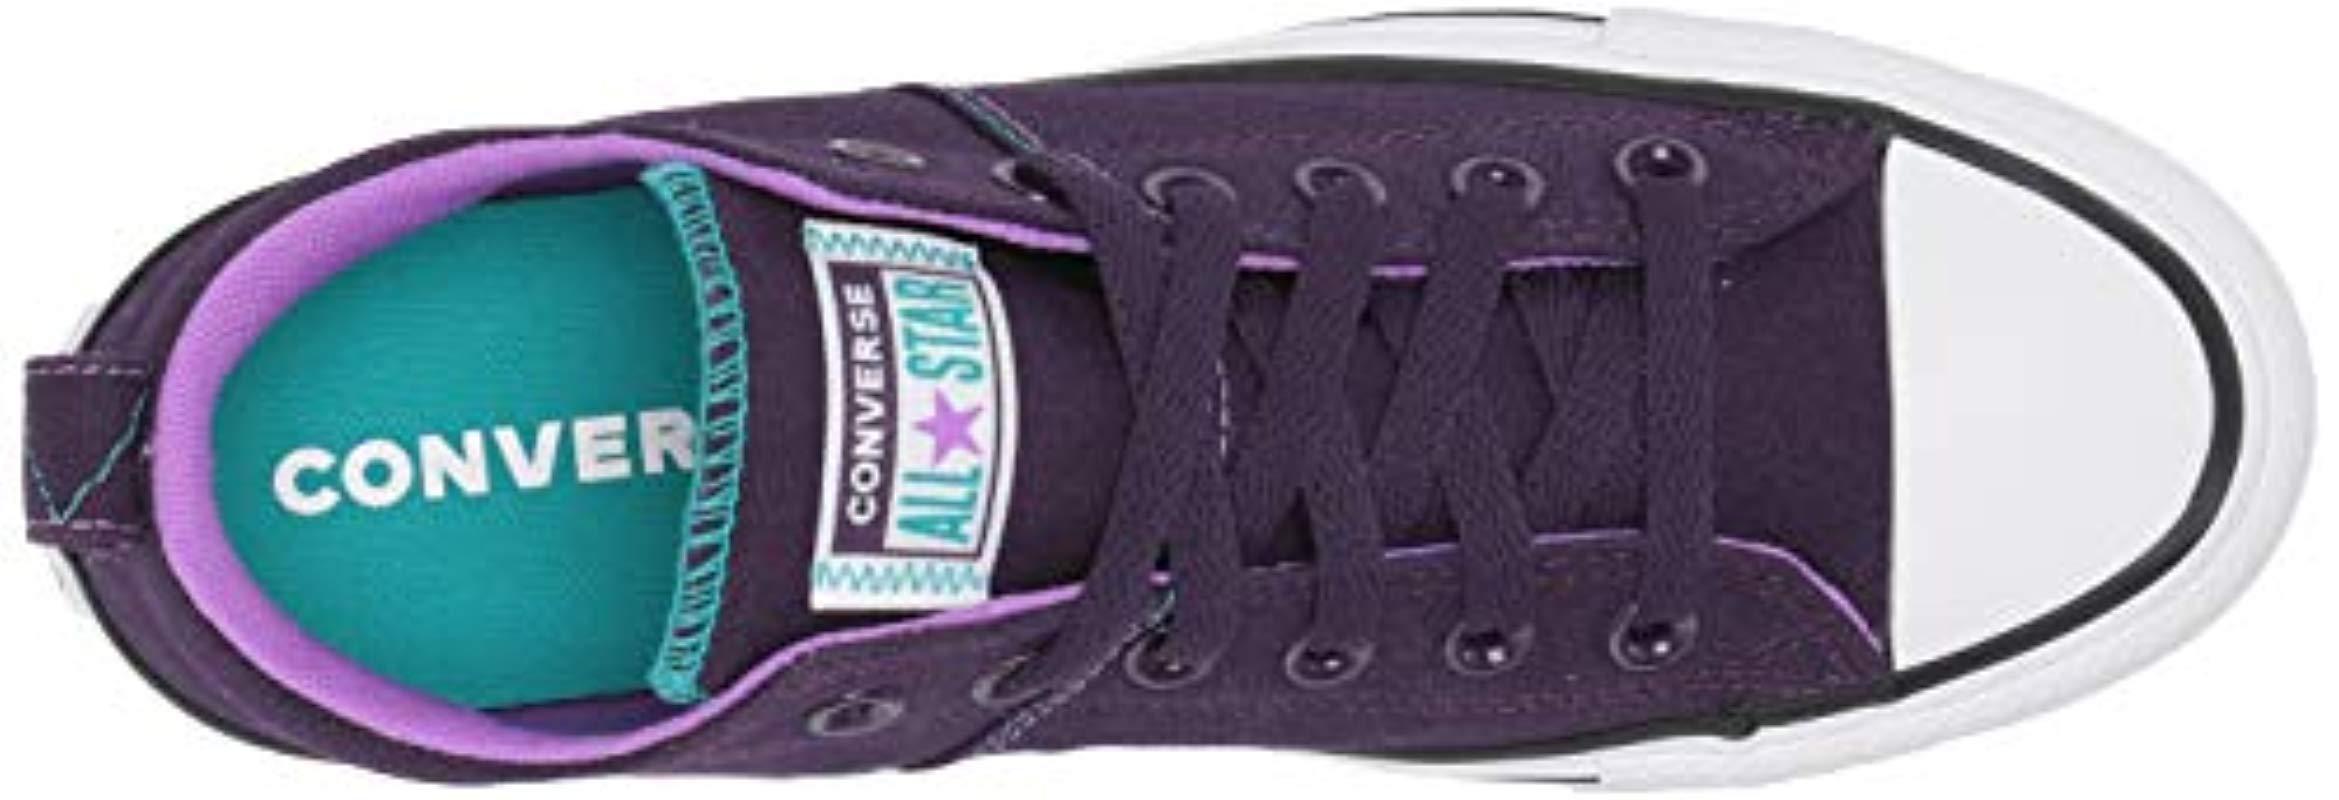 Converse Canvas Chuck Taylor All Star Madison Low Top Sneaker in Grand  Purple/White/Black (Purple) | Lyst